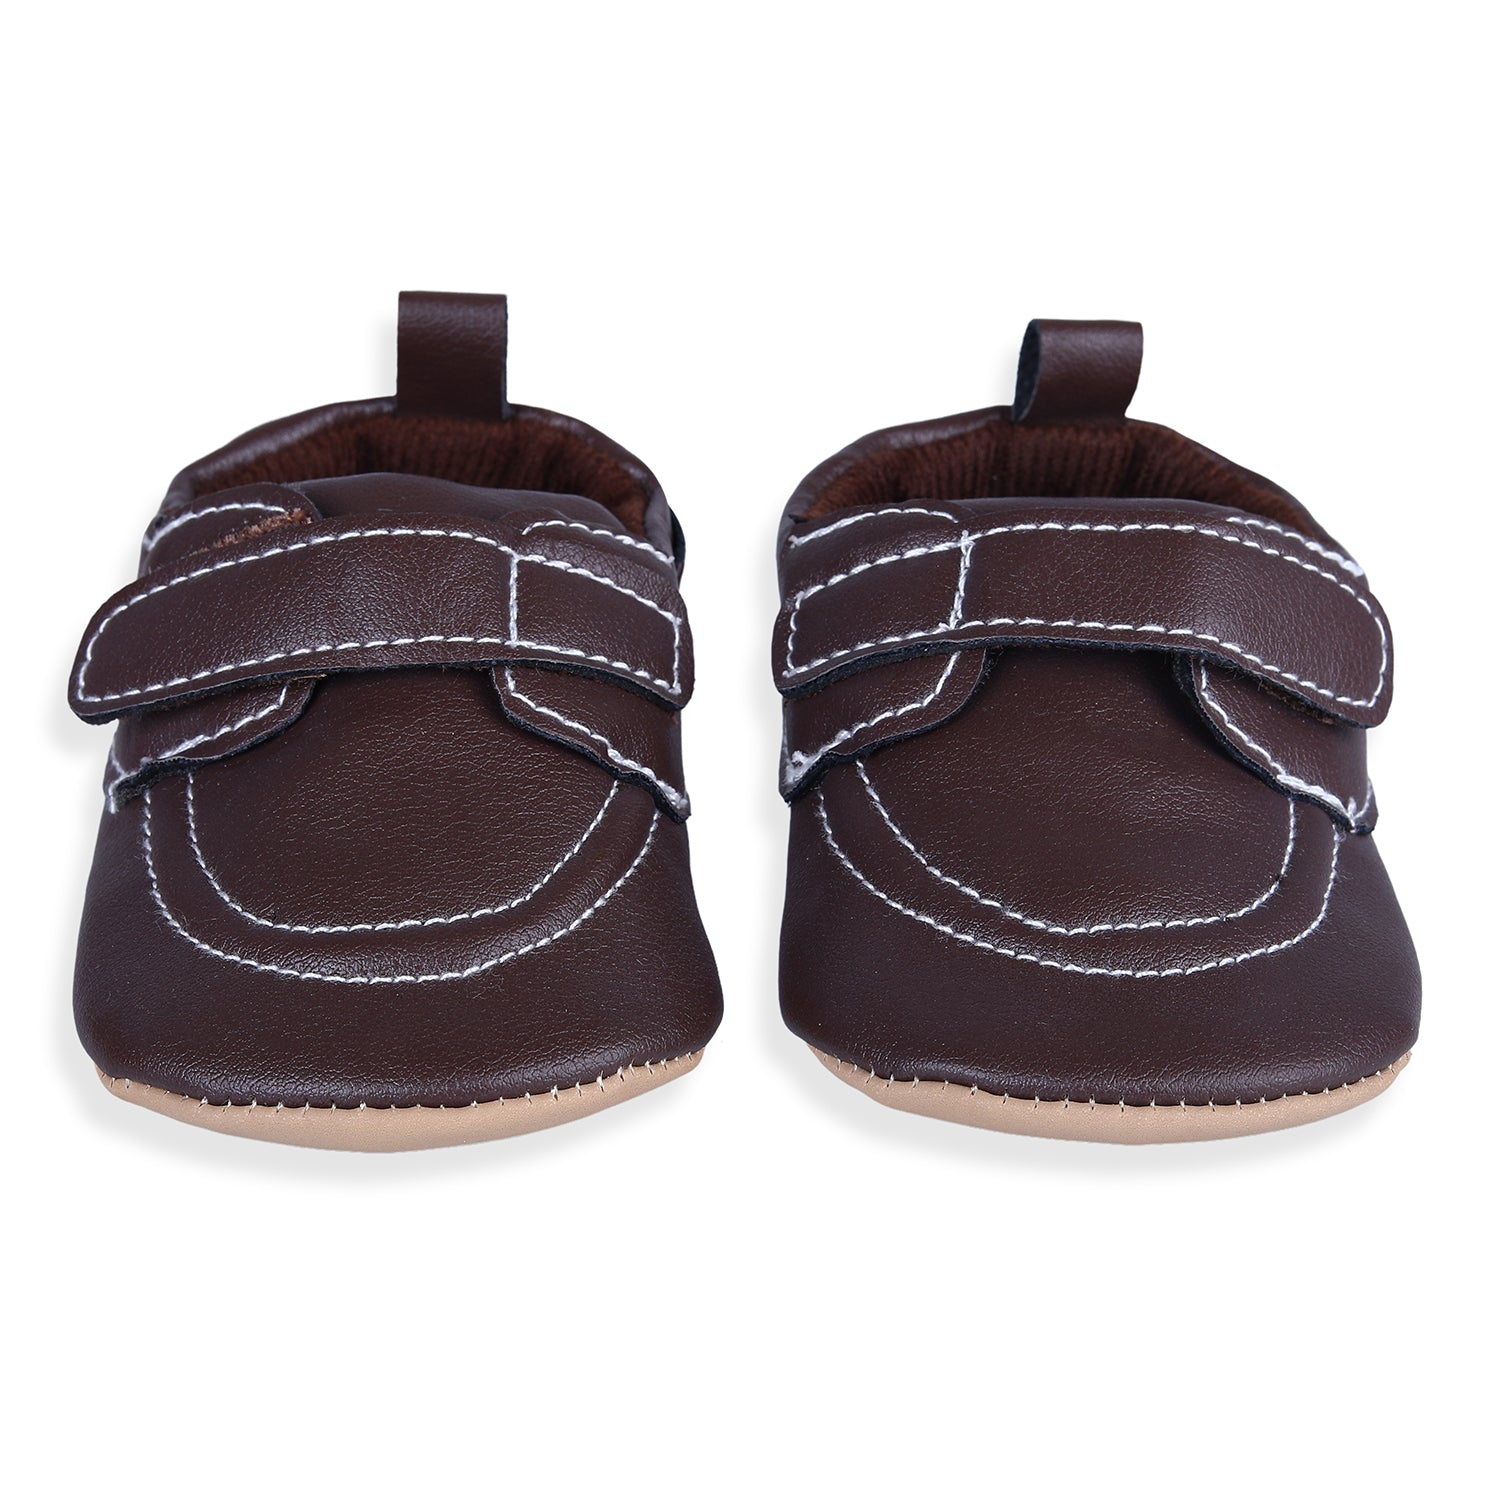 Solid Hookloop Stylish Leather Velcro Shoes - Brown